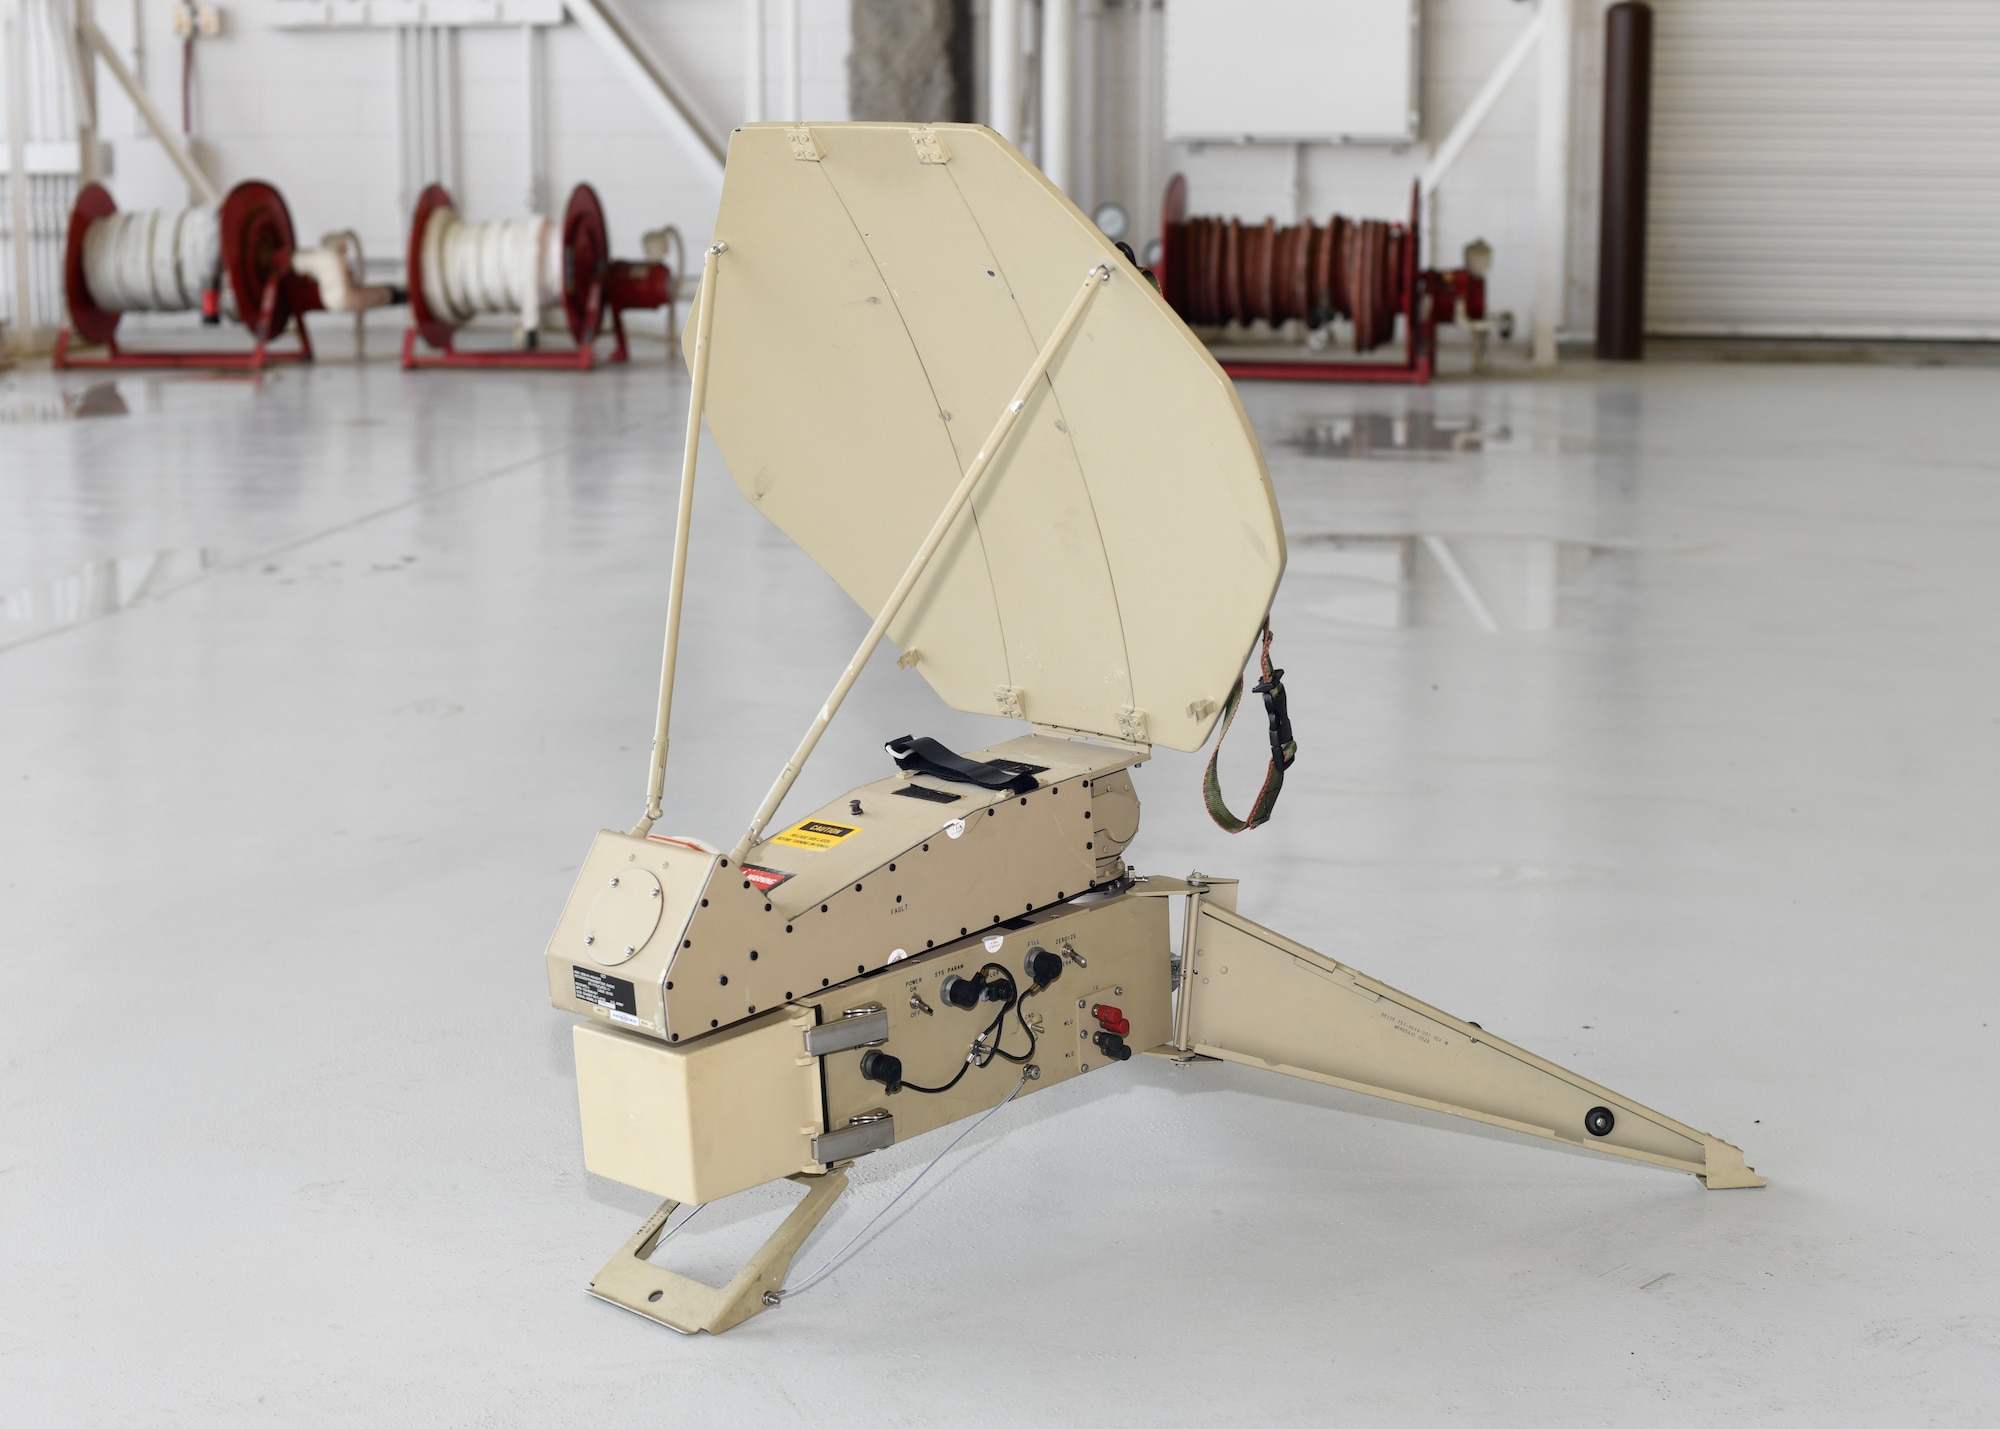 A piece of communications equipment sits on display during the 509th Communications Squadron change of command ceremony.